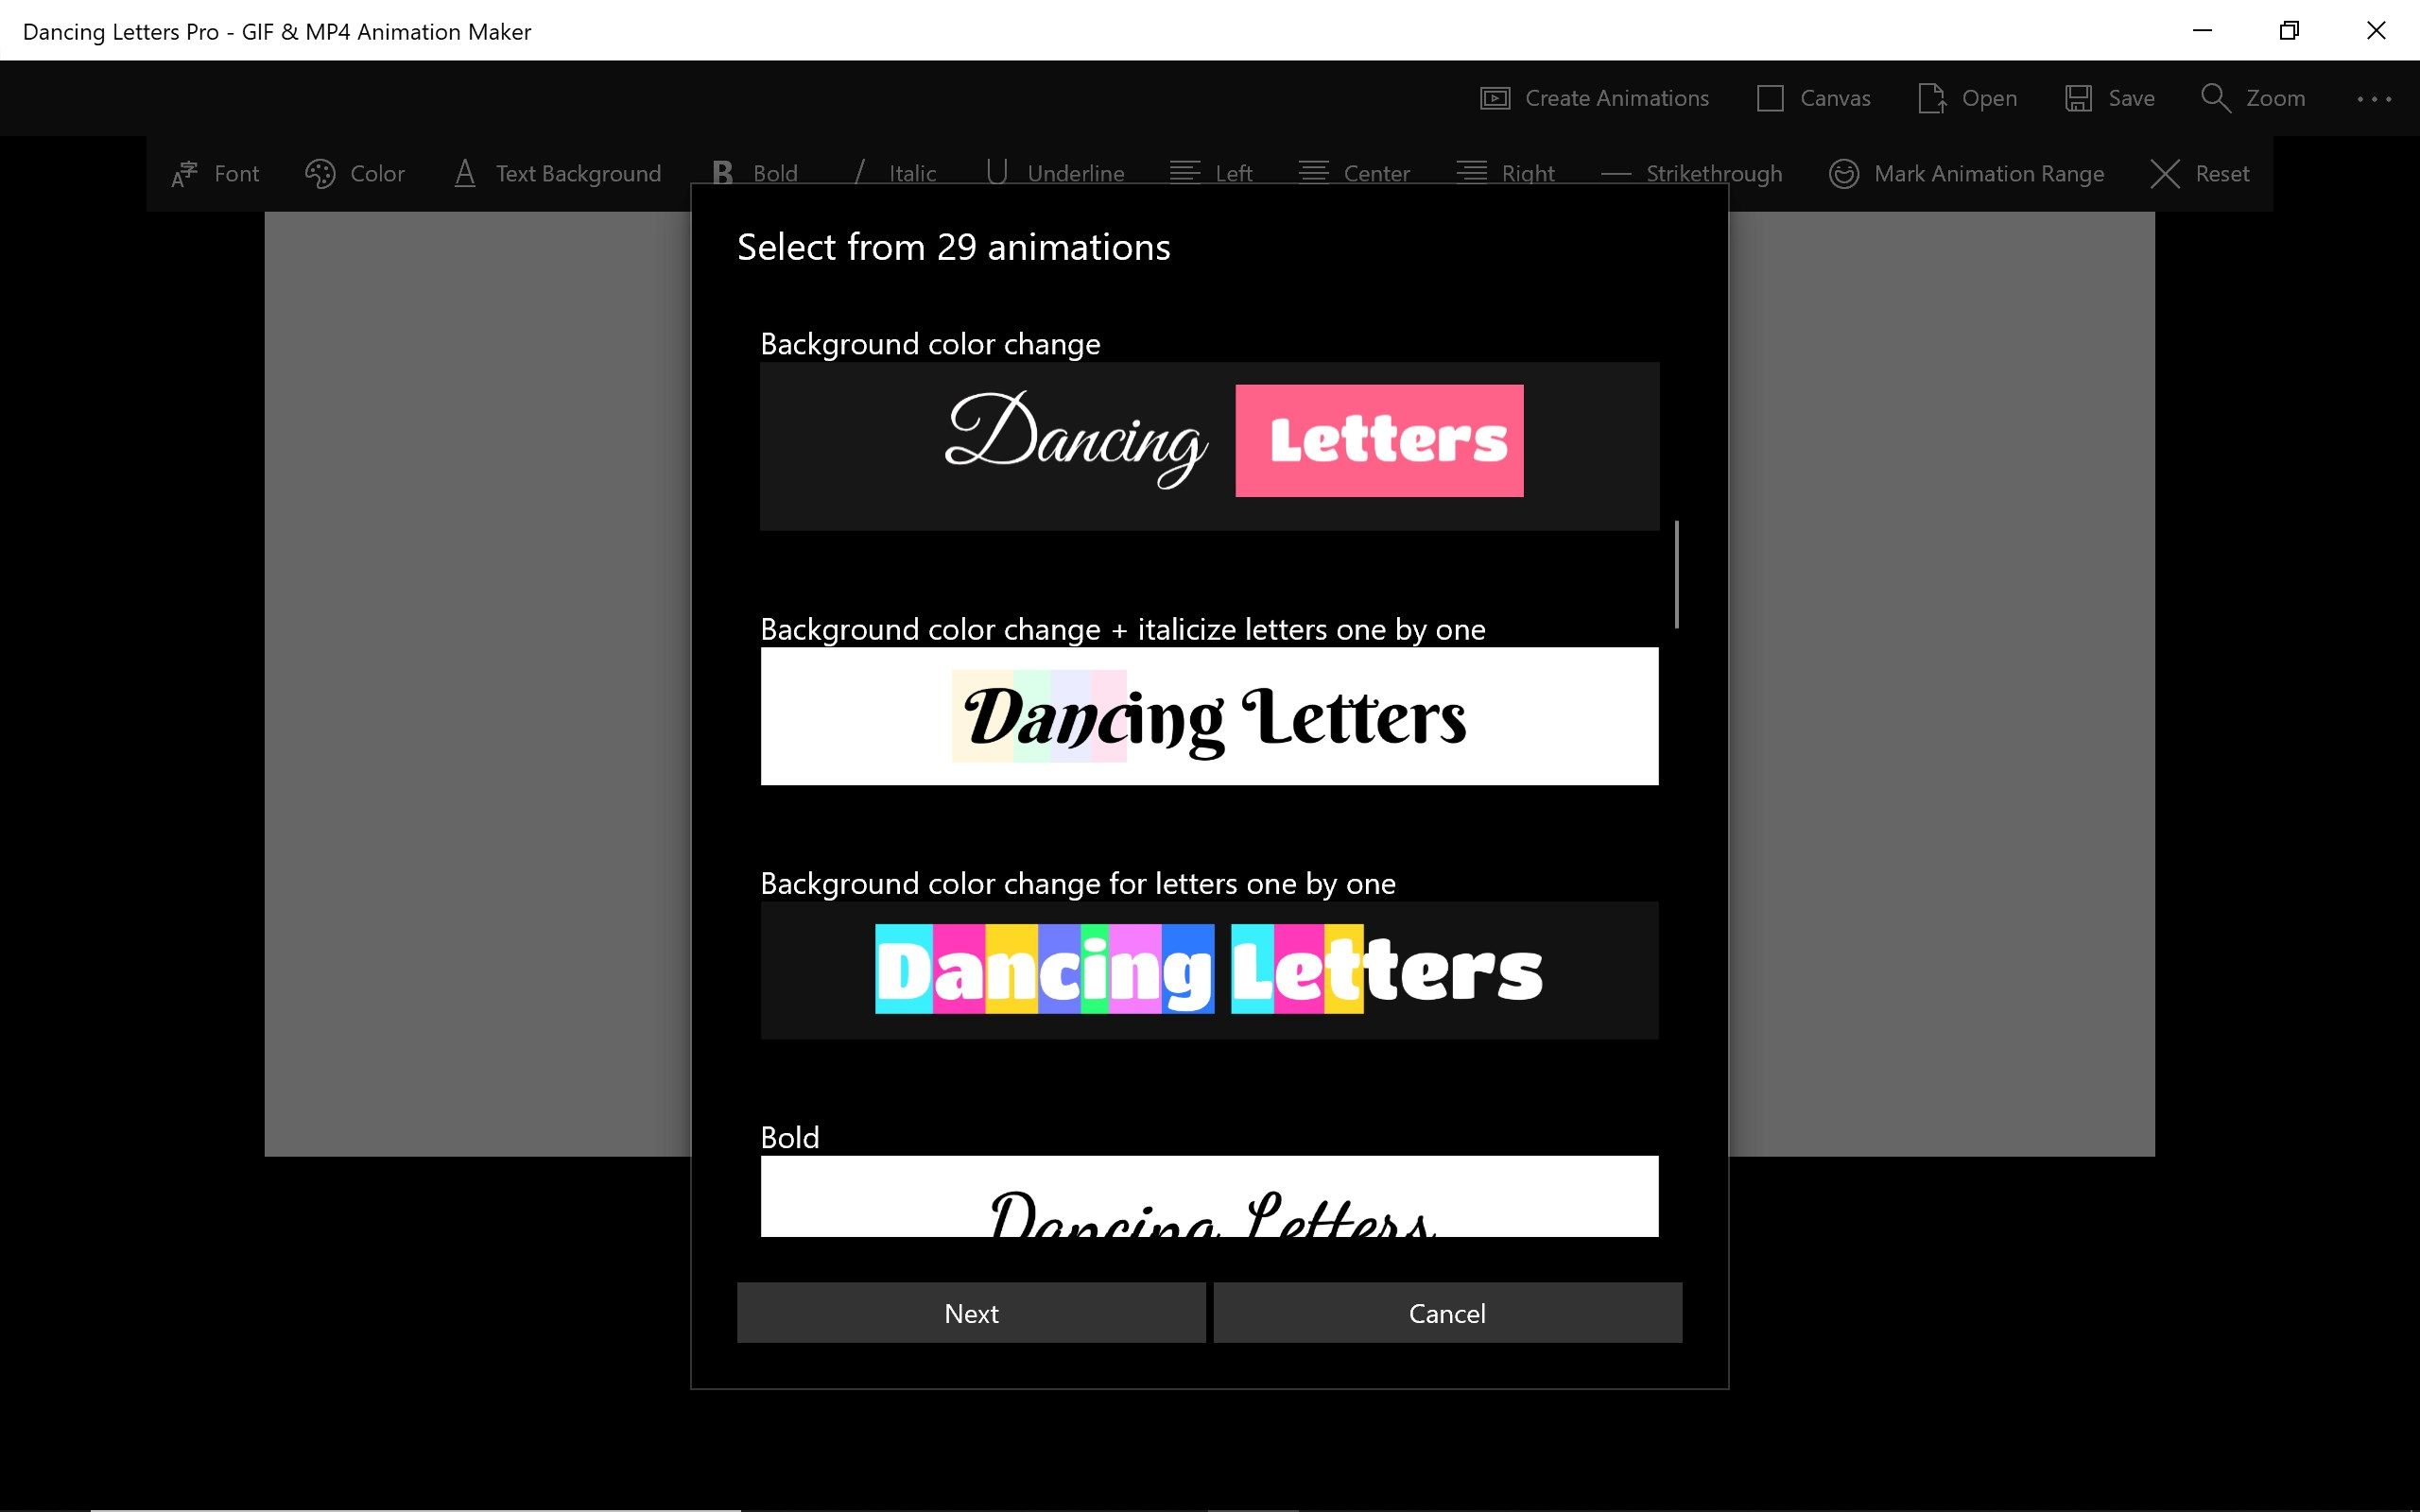 Dancing Letters Pro - GIF & MP4 Animation Maker